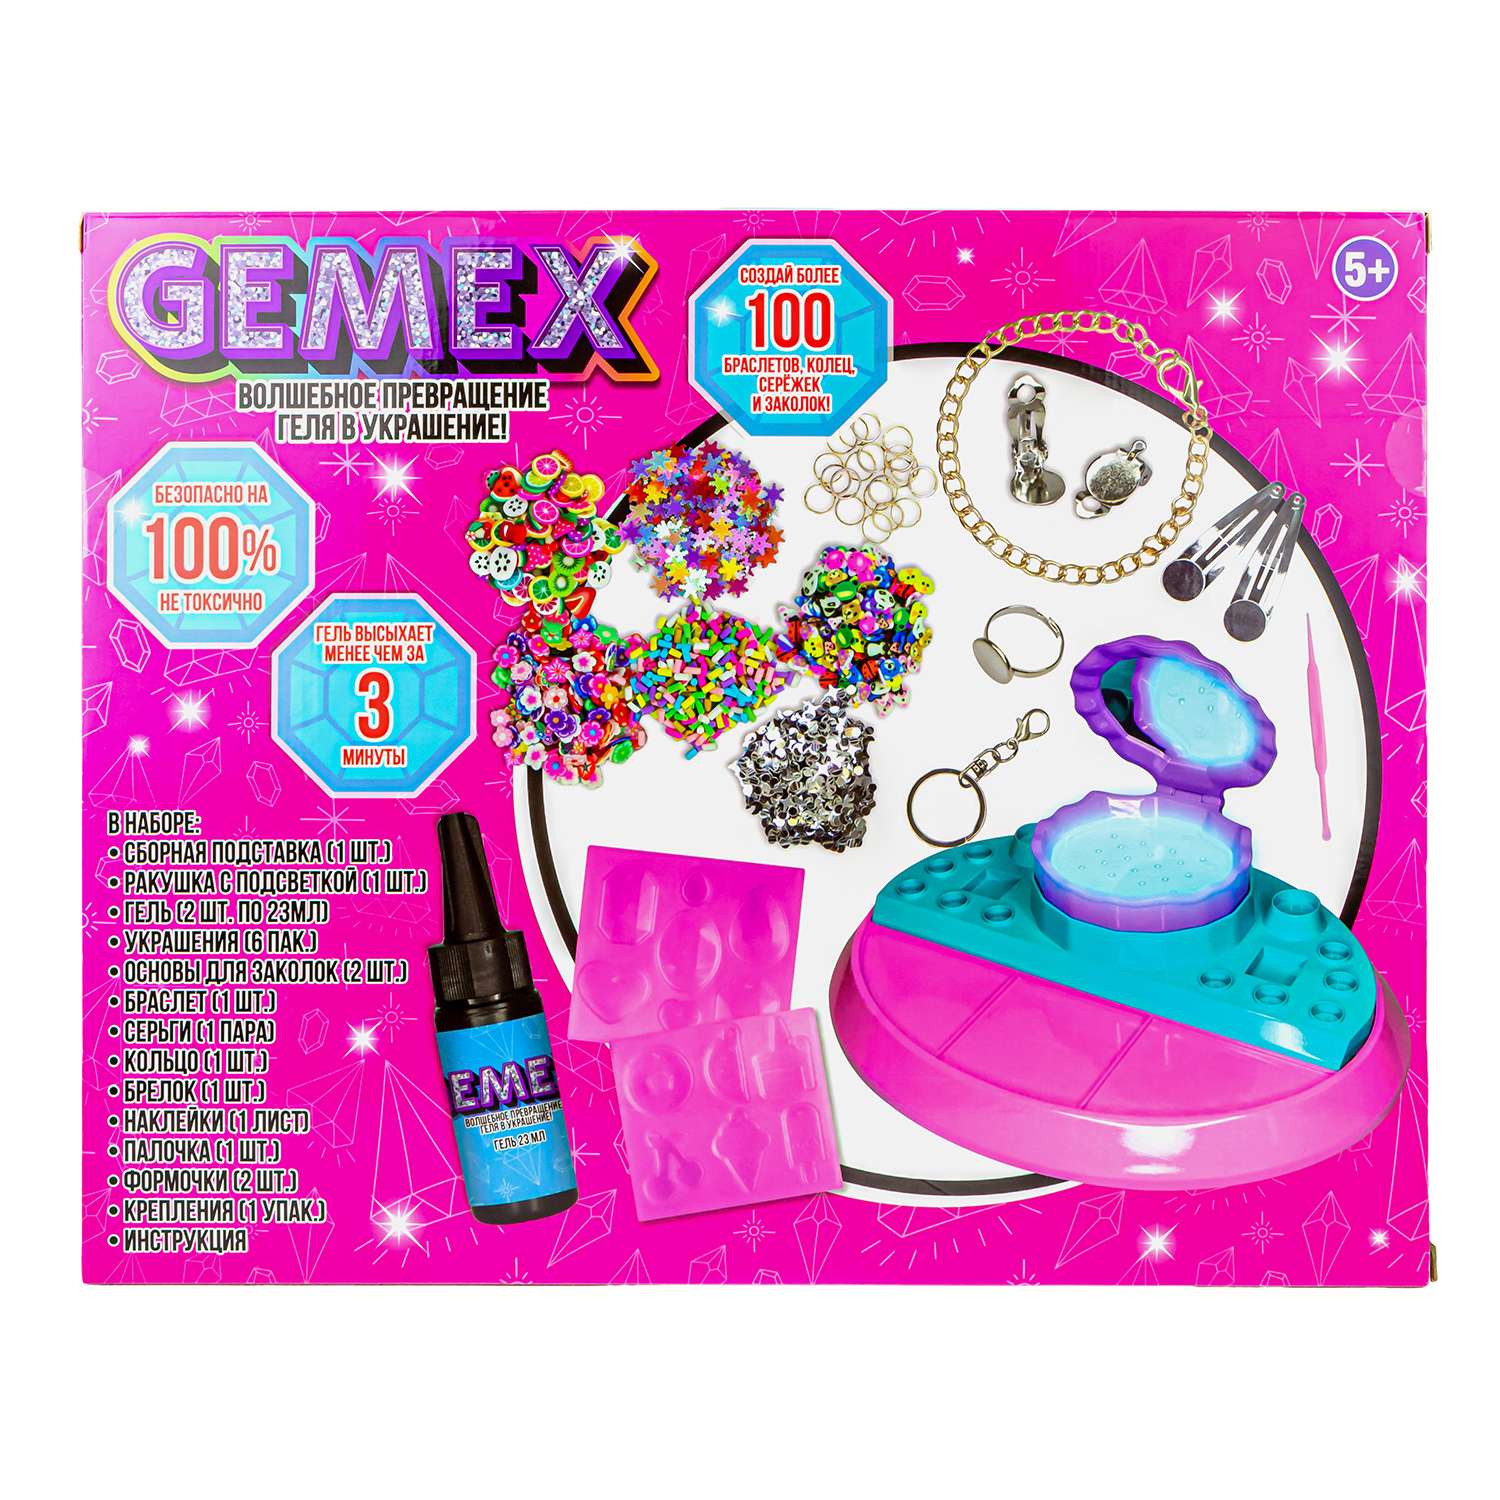 ATELIER A ONGLES GEMEX